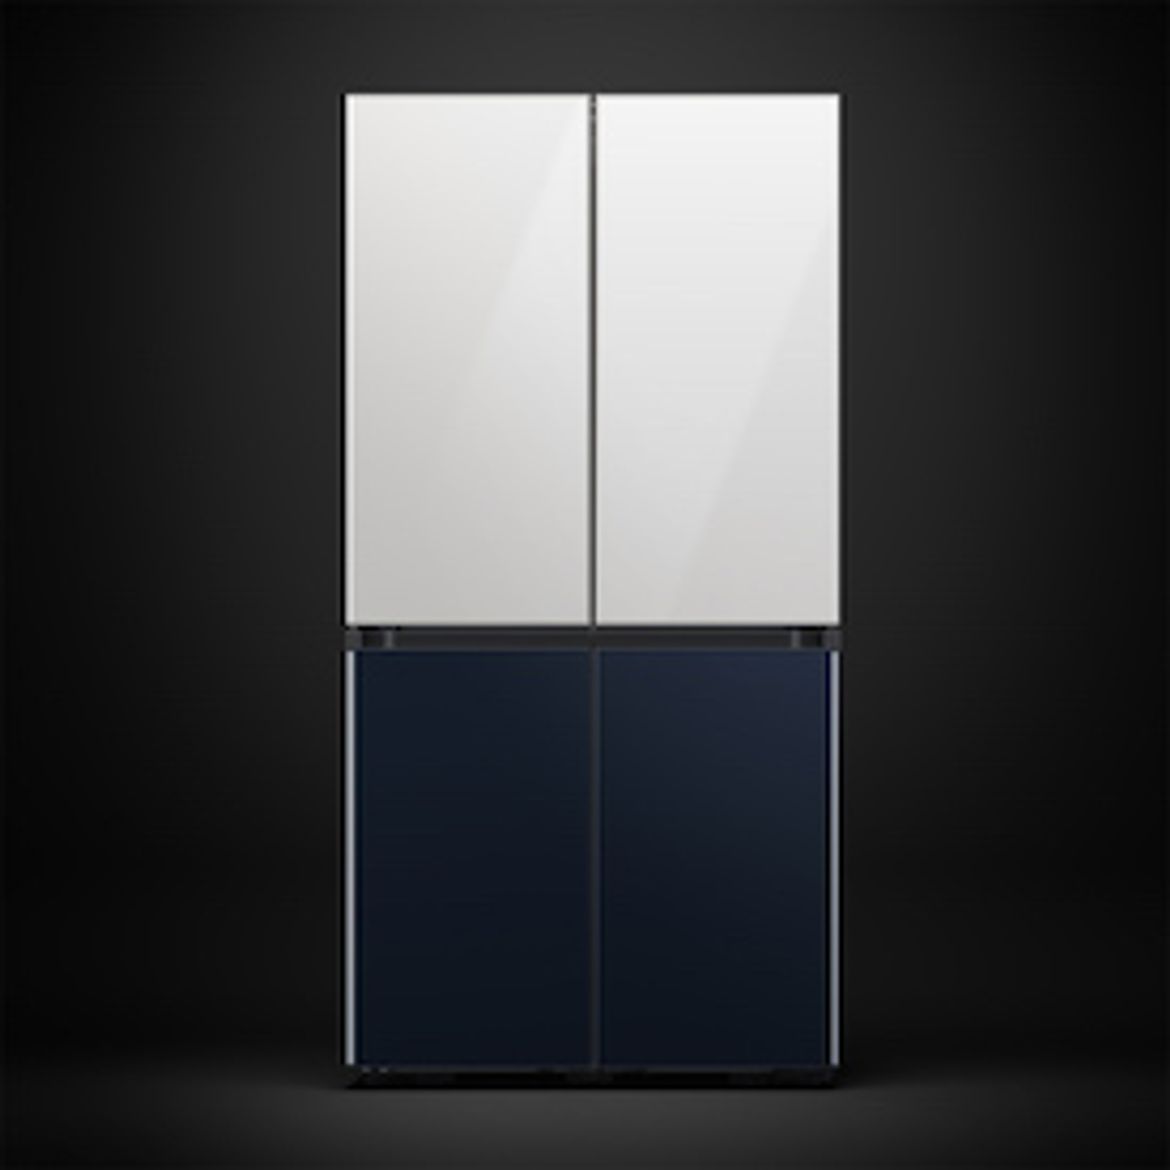 Get up to $1,200 off on Select Bespoke Refrigerators